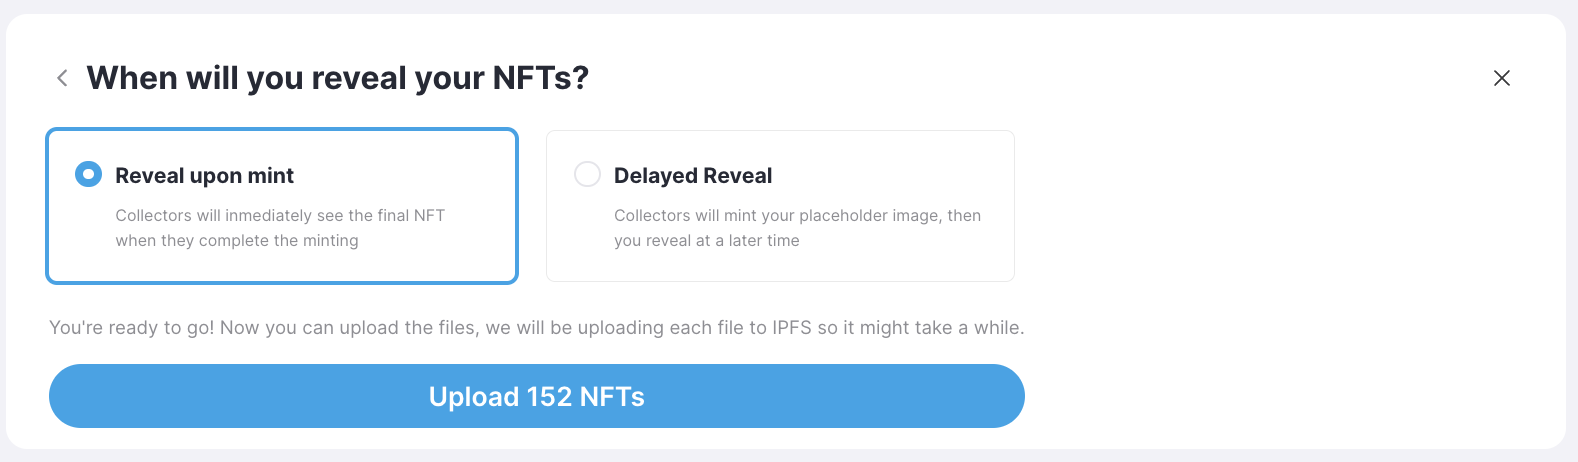 Options for revealing NFTs